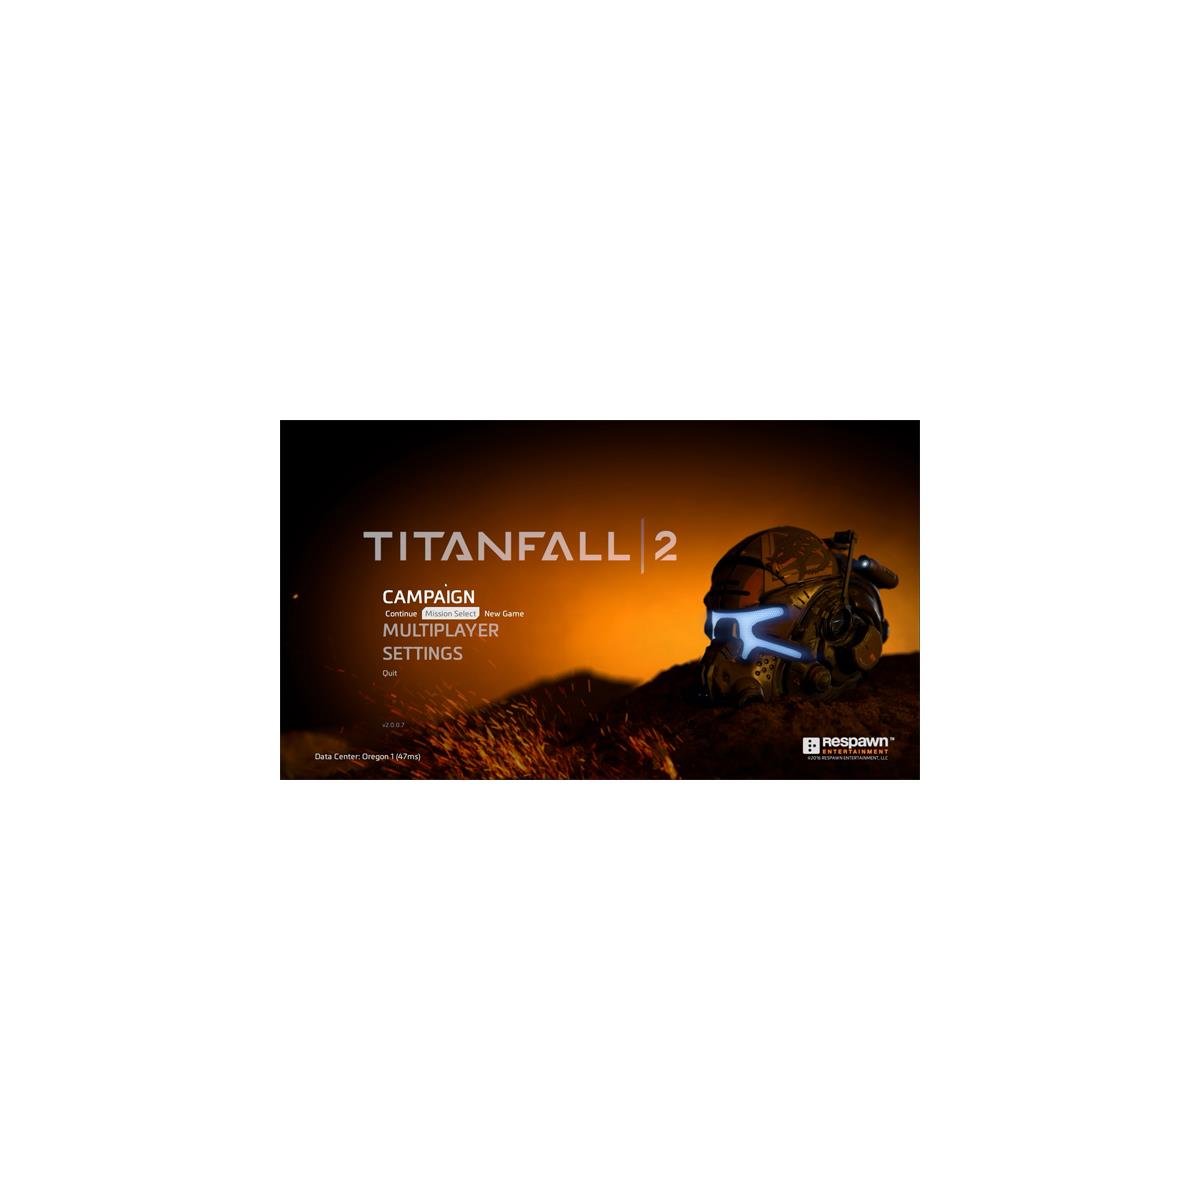 Titanfall 2 Benchmarks  AnandTech Forums: Technology, Hardware, Software,  and Deals